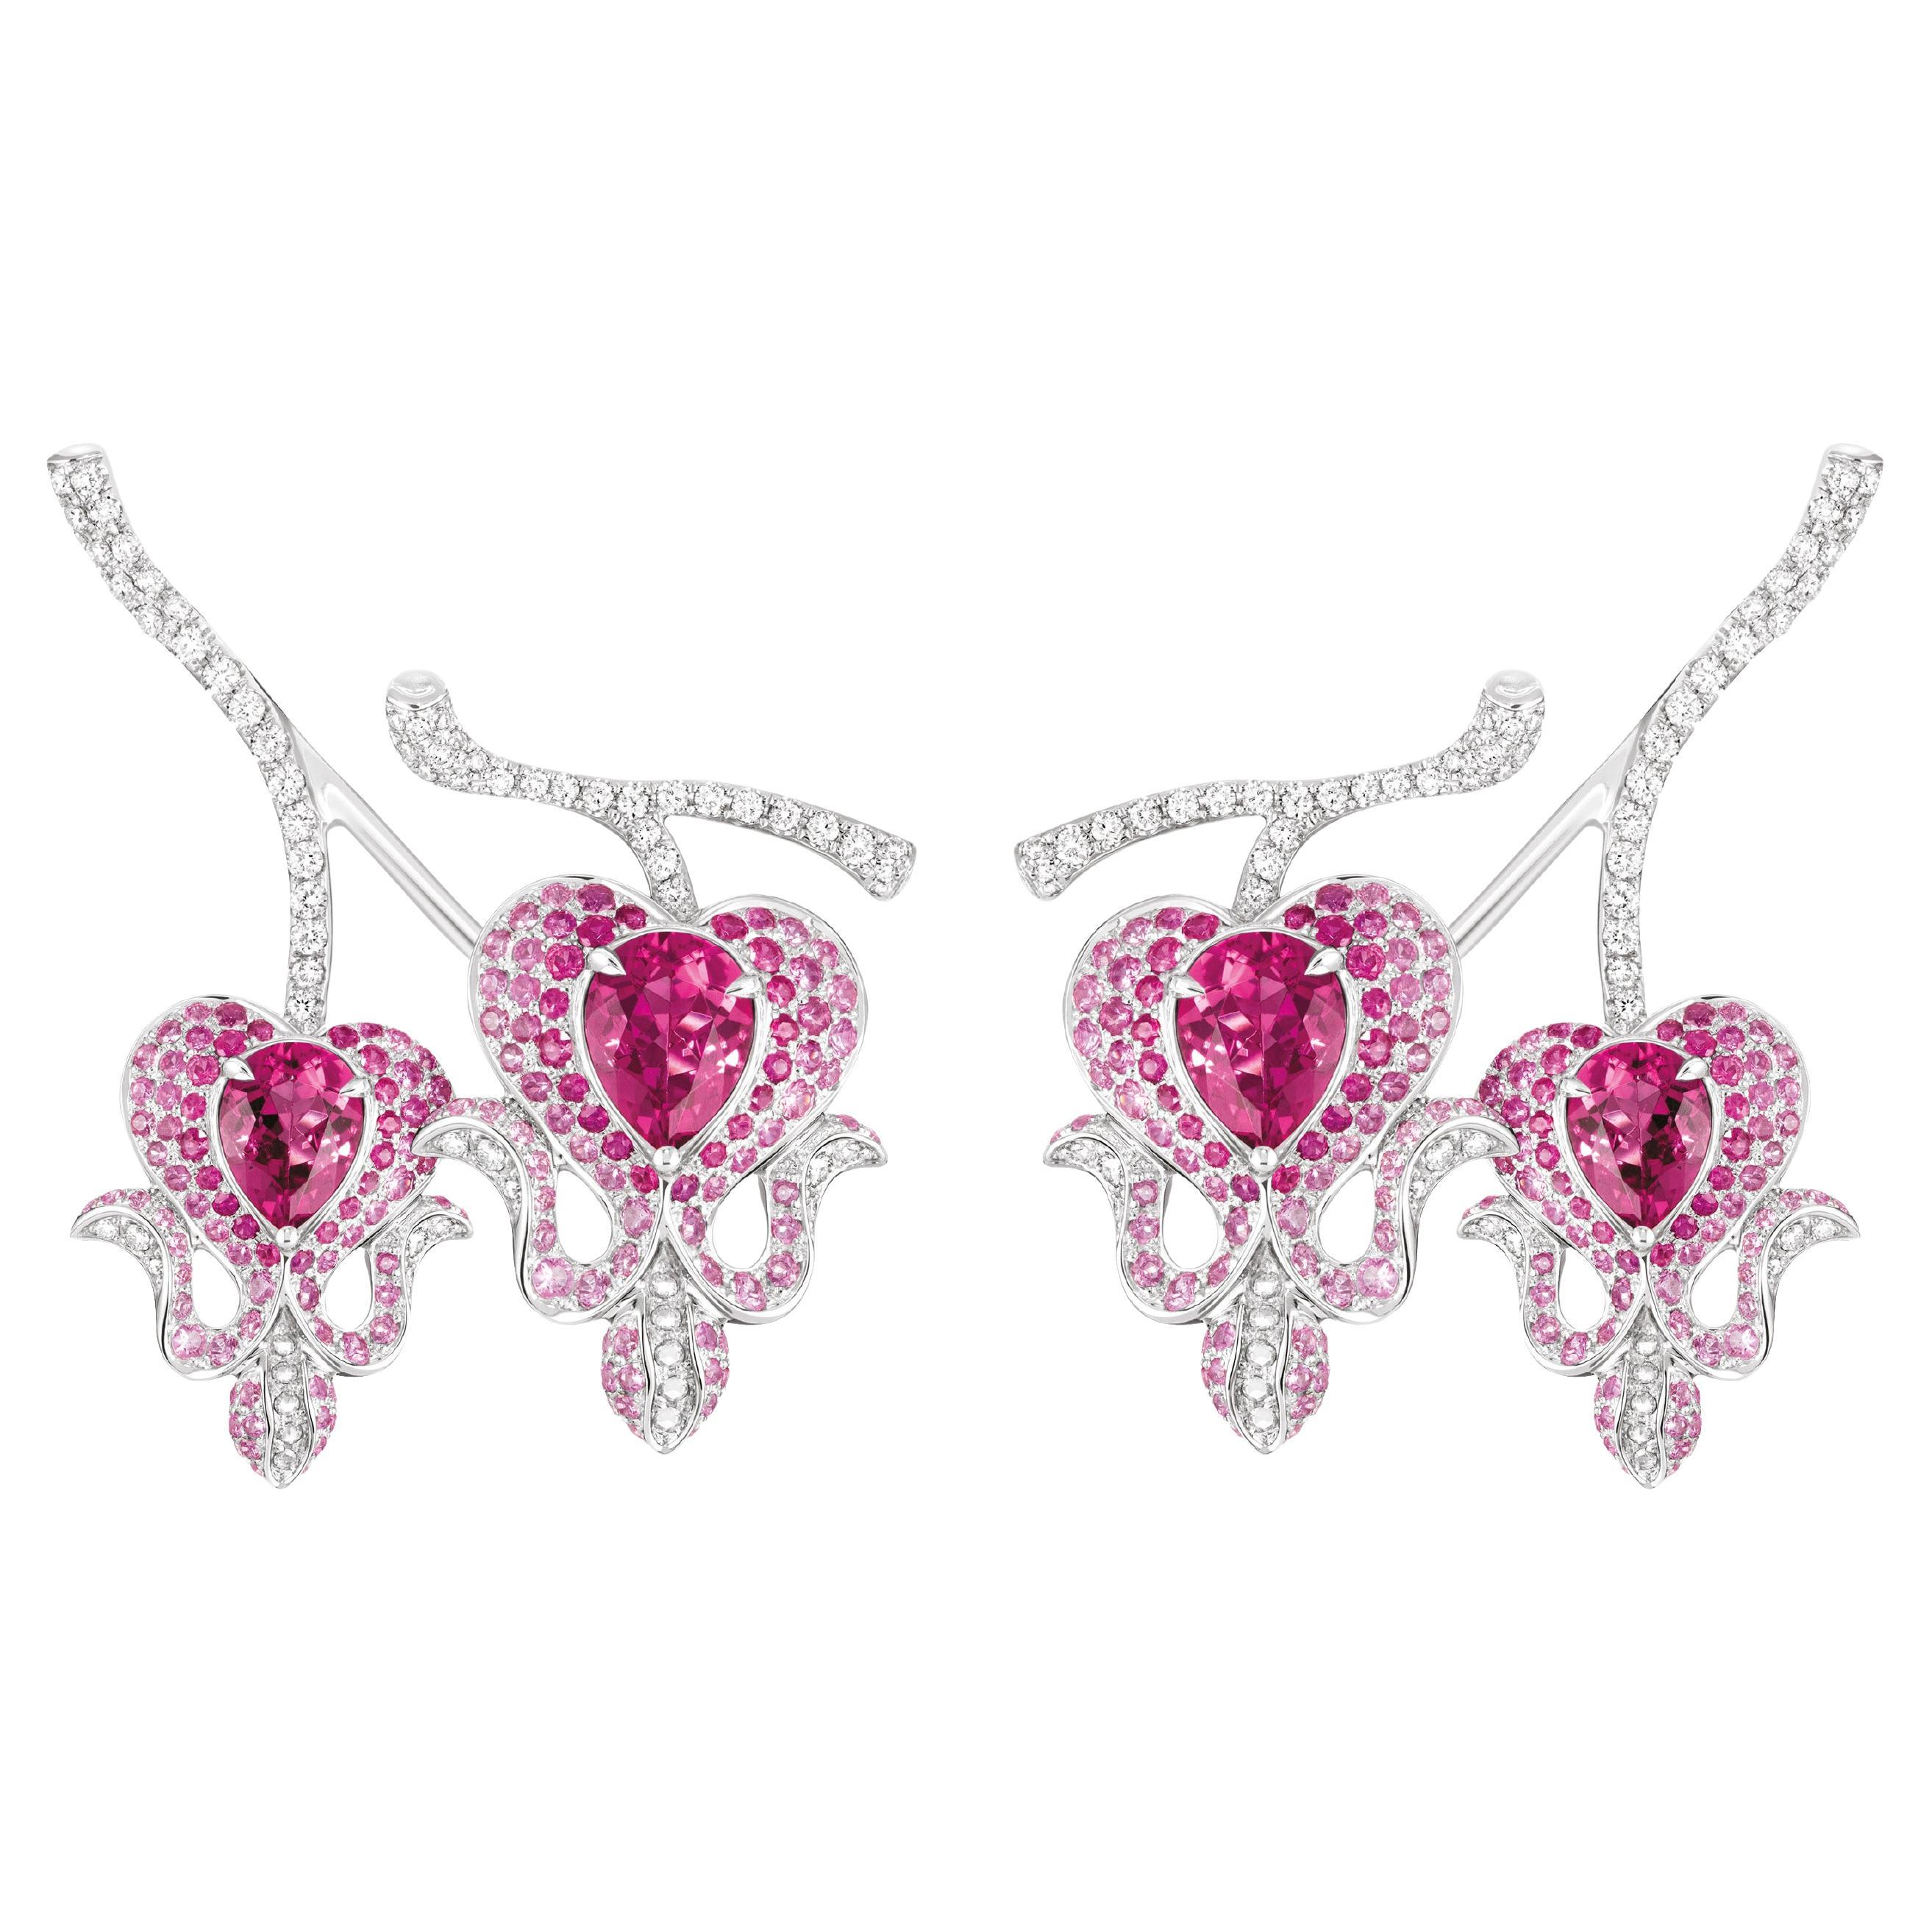 Red Carpet "Florealis" - Rubellite and Diamond Earrings For Sale